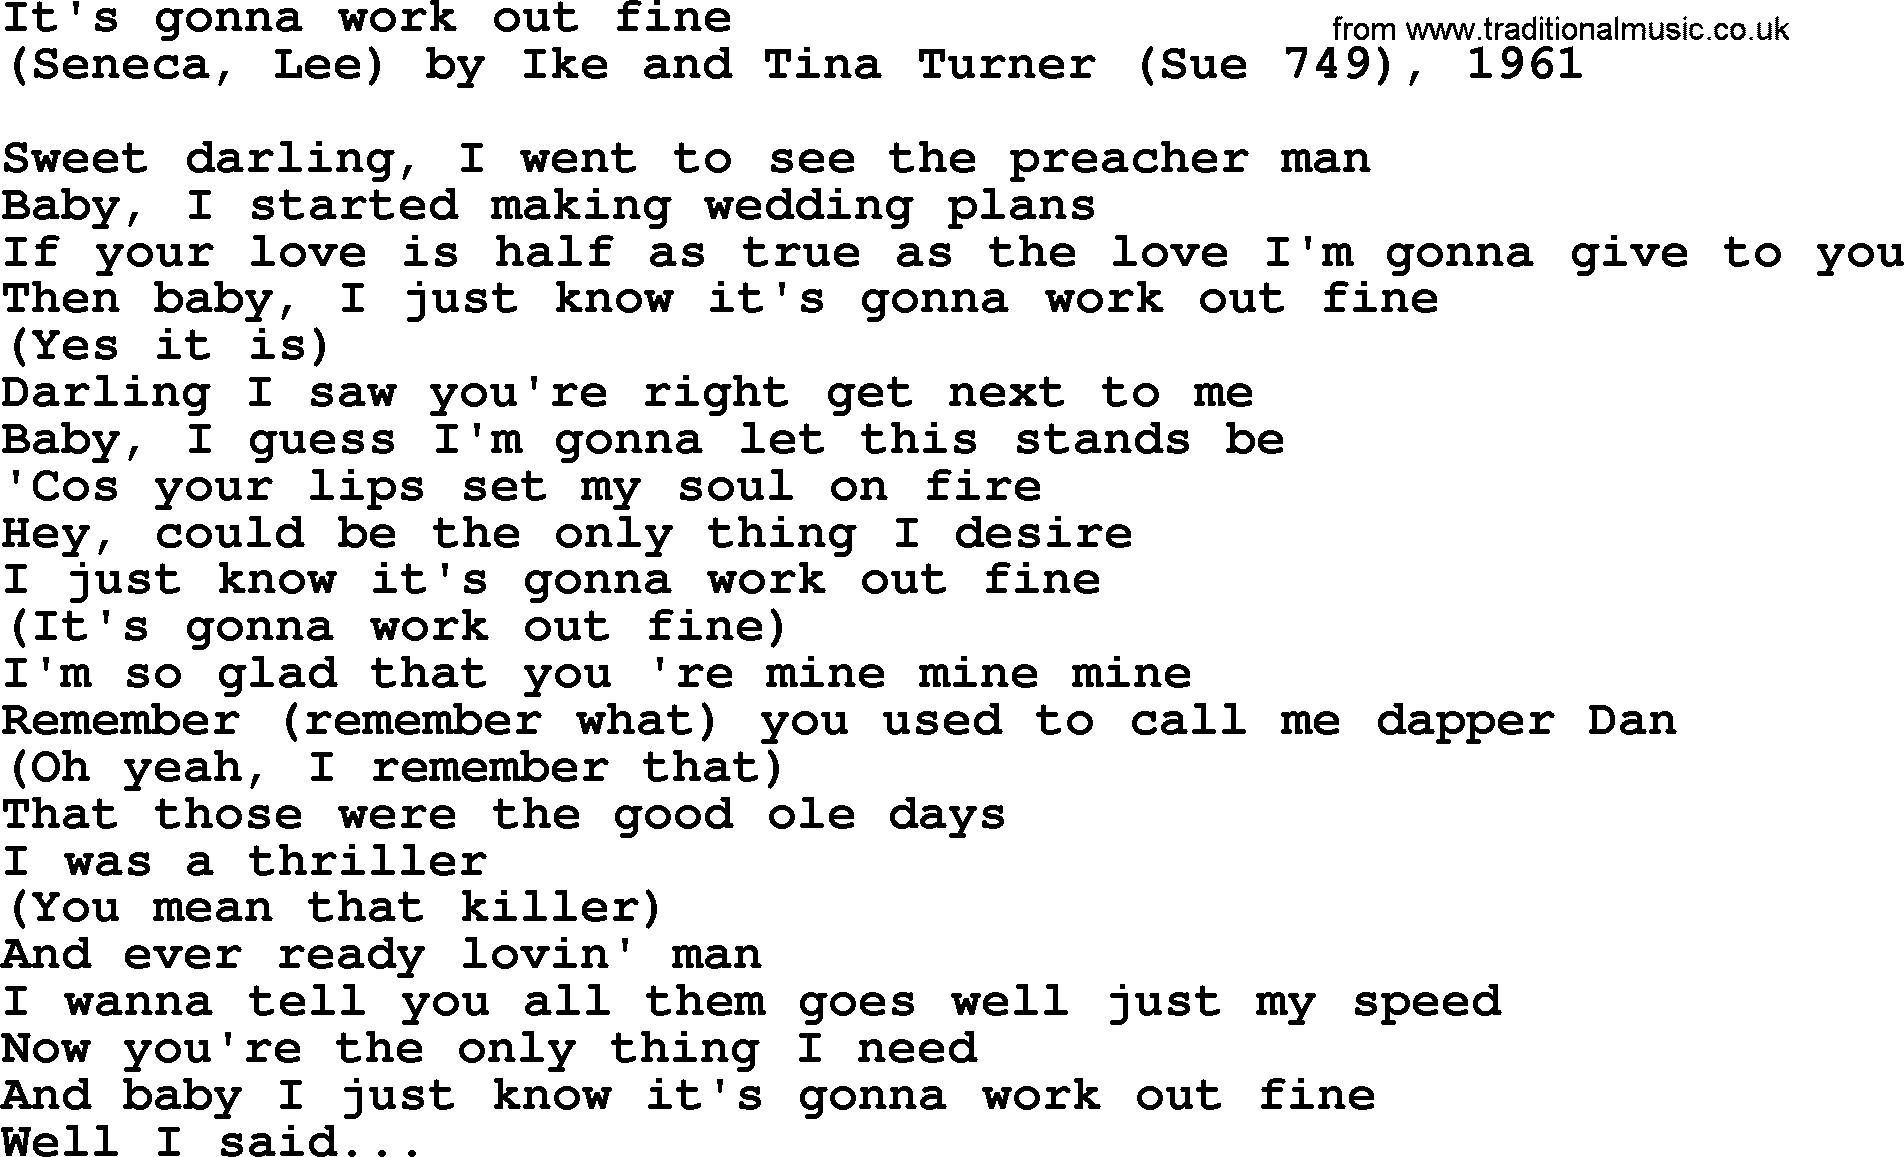 Bruce Springsteen song: It's Gonna Work Out Fine lyrics